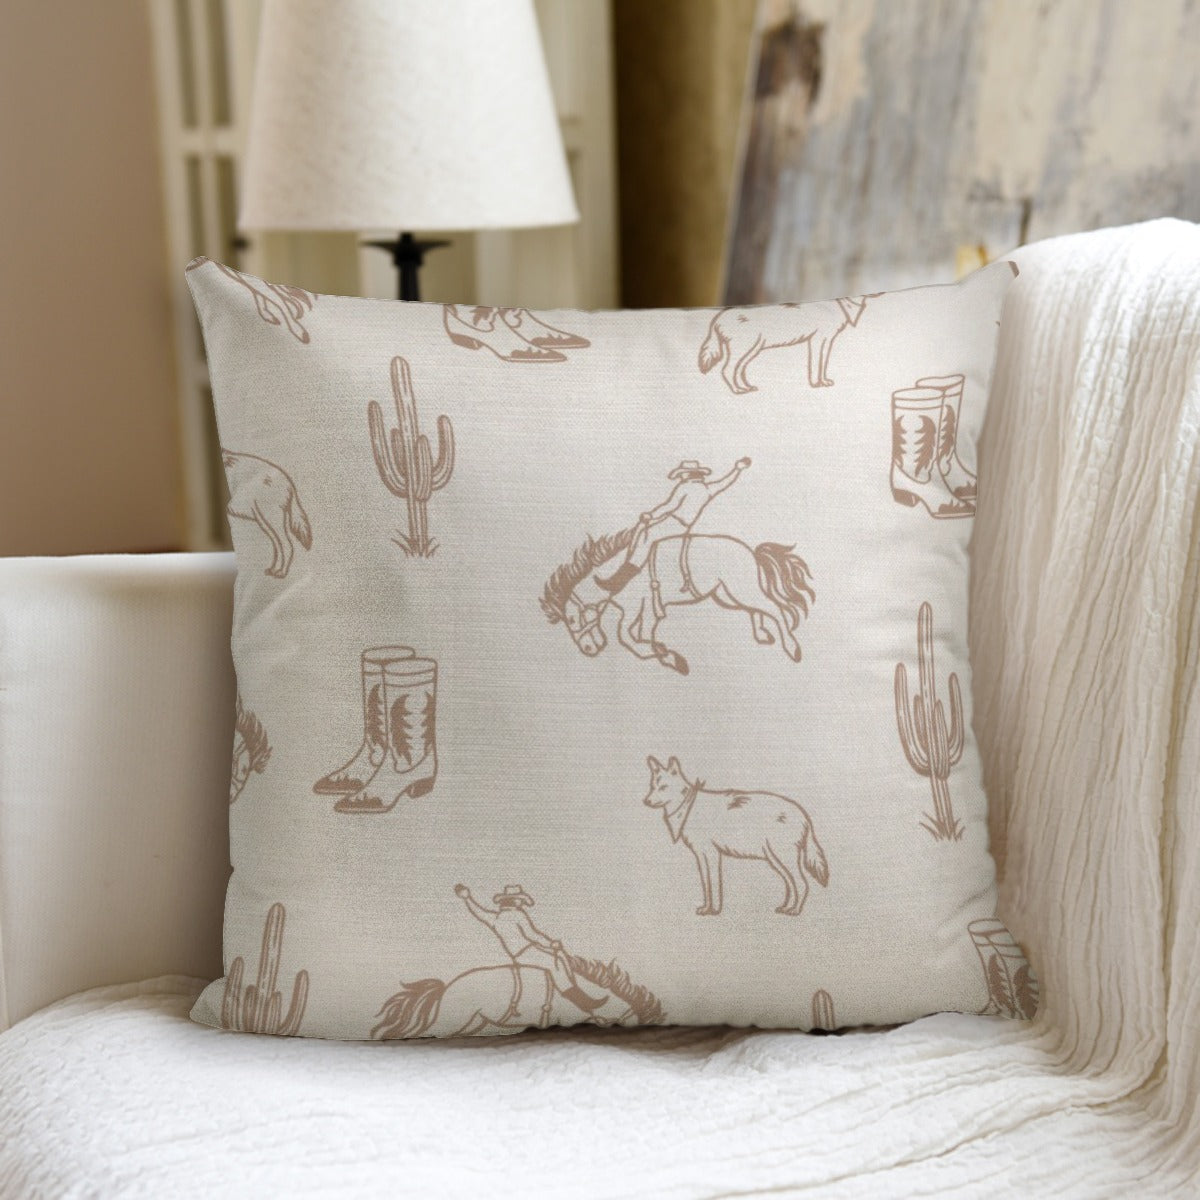 Western Days couch pillow with pillow Inserts